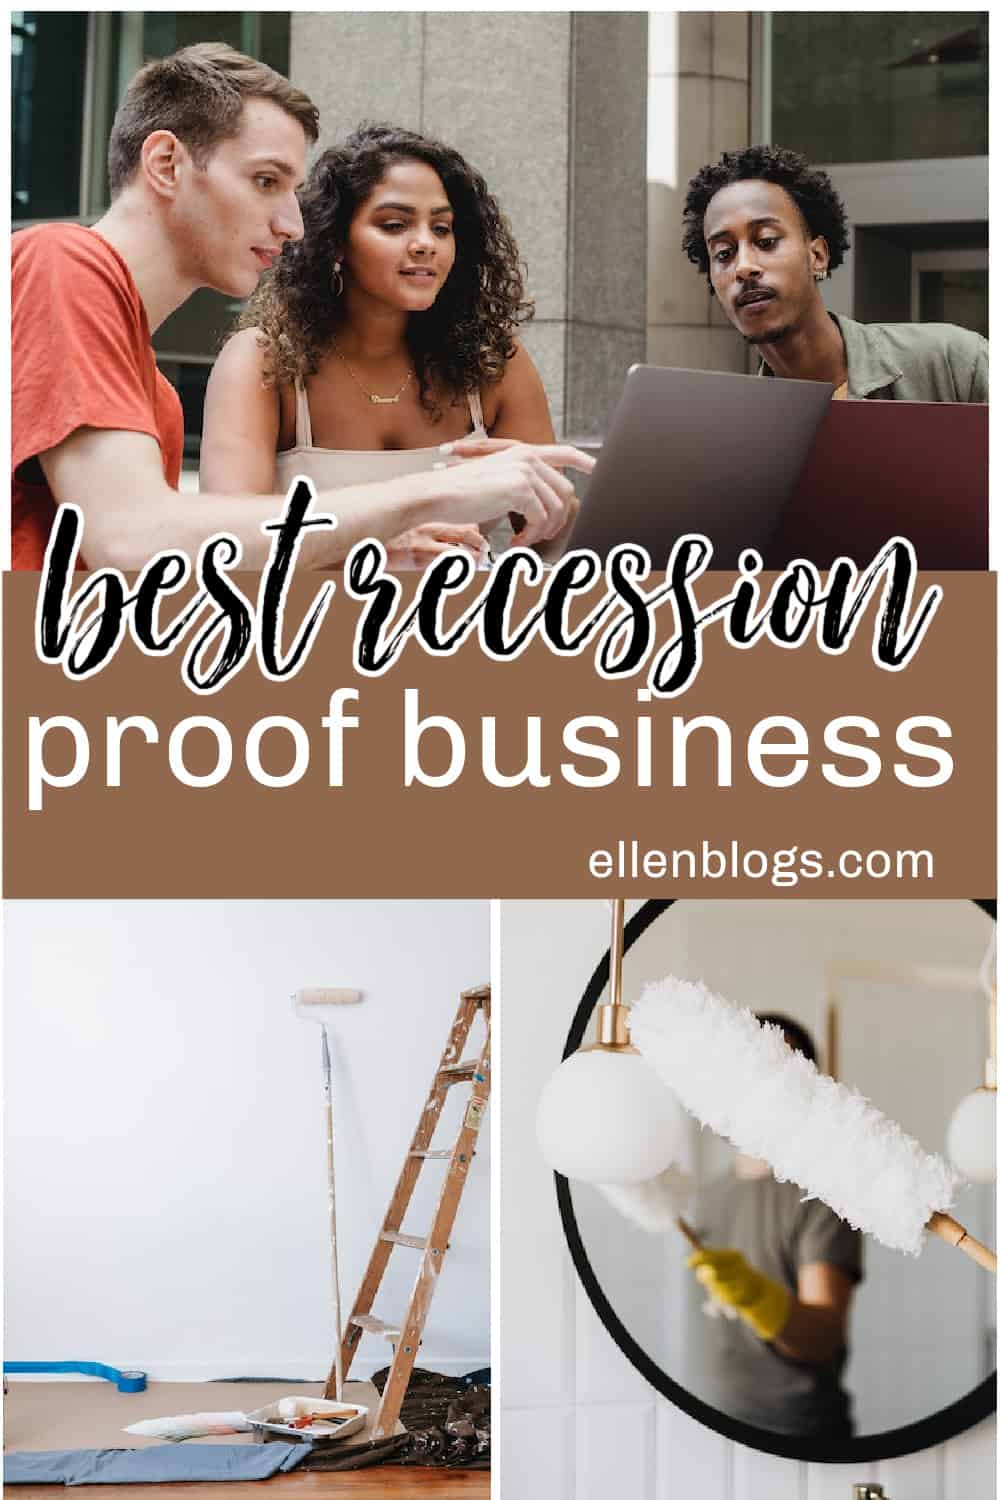 What is the best business to start in a recession? Check out these good business ideas that can succeed even in an economic crisis.